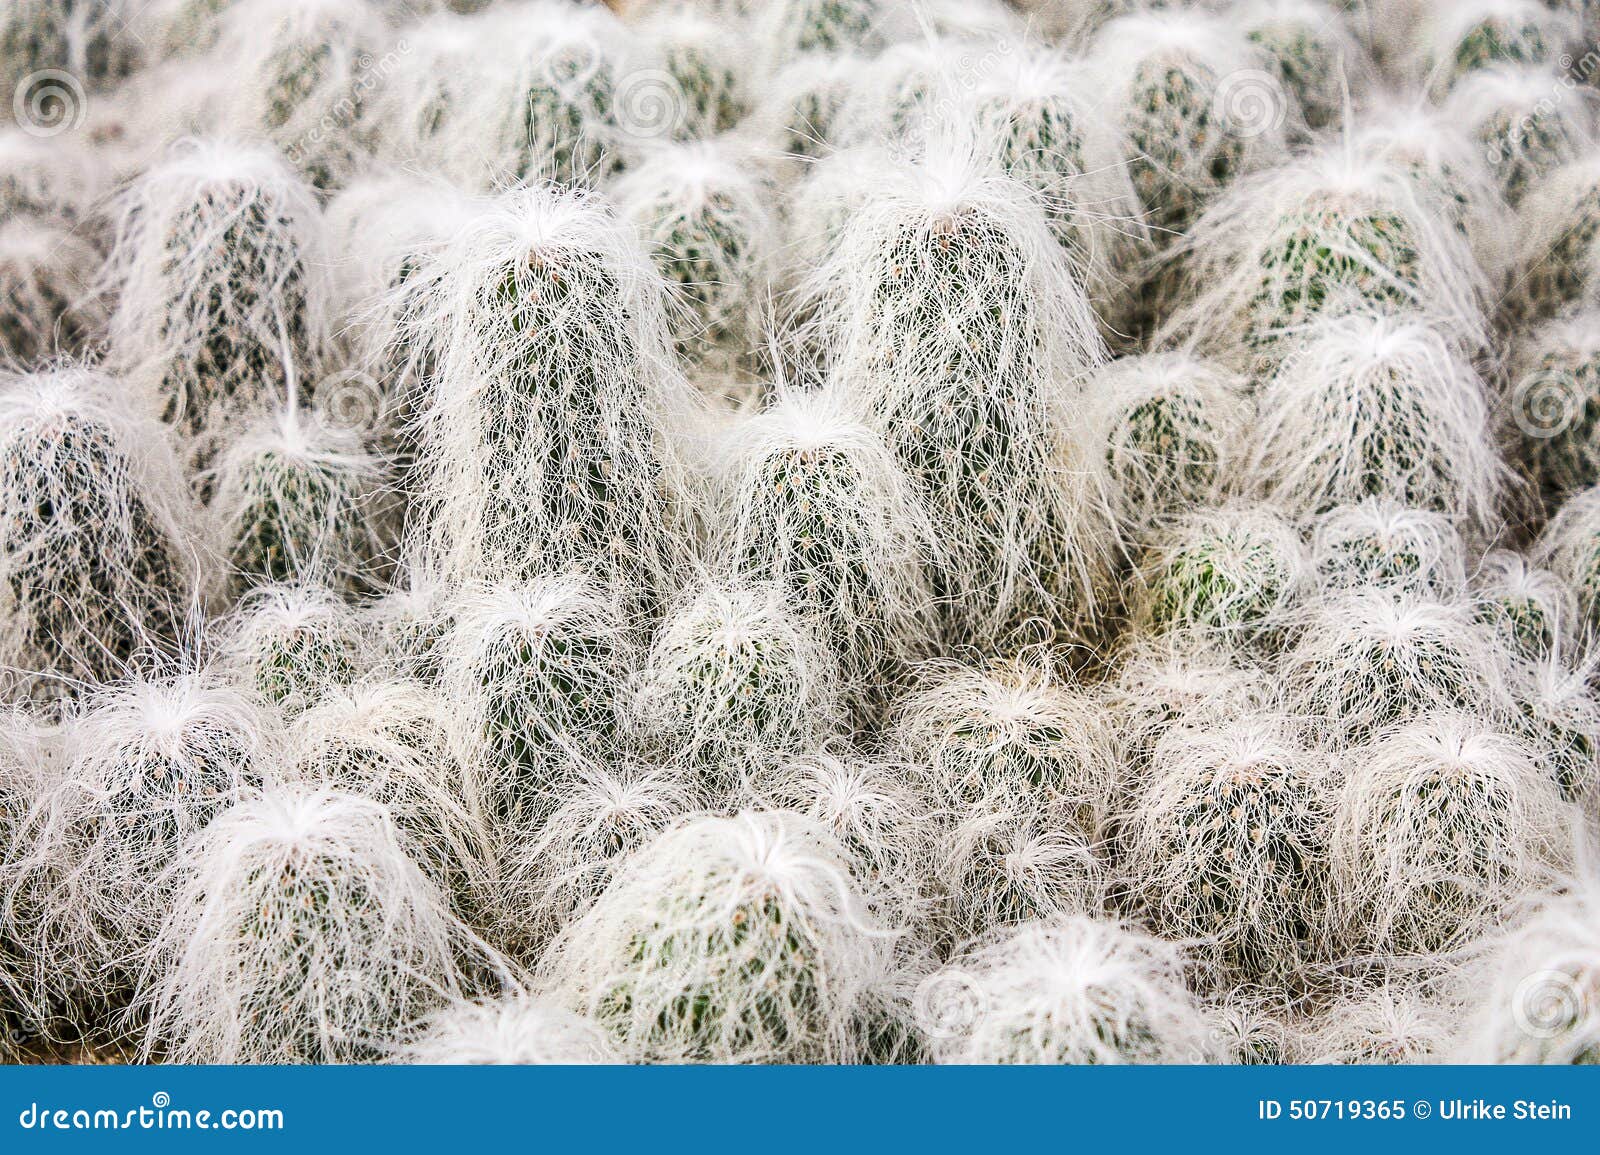 group of hairy spiny old man cactus